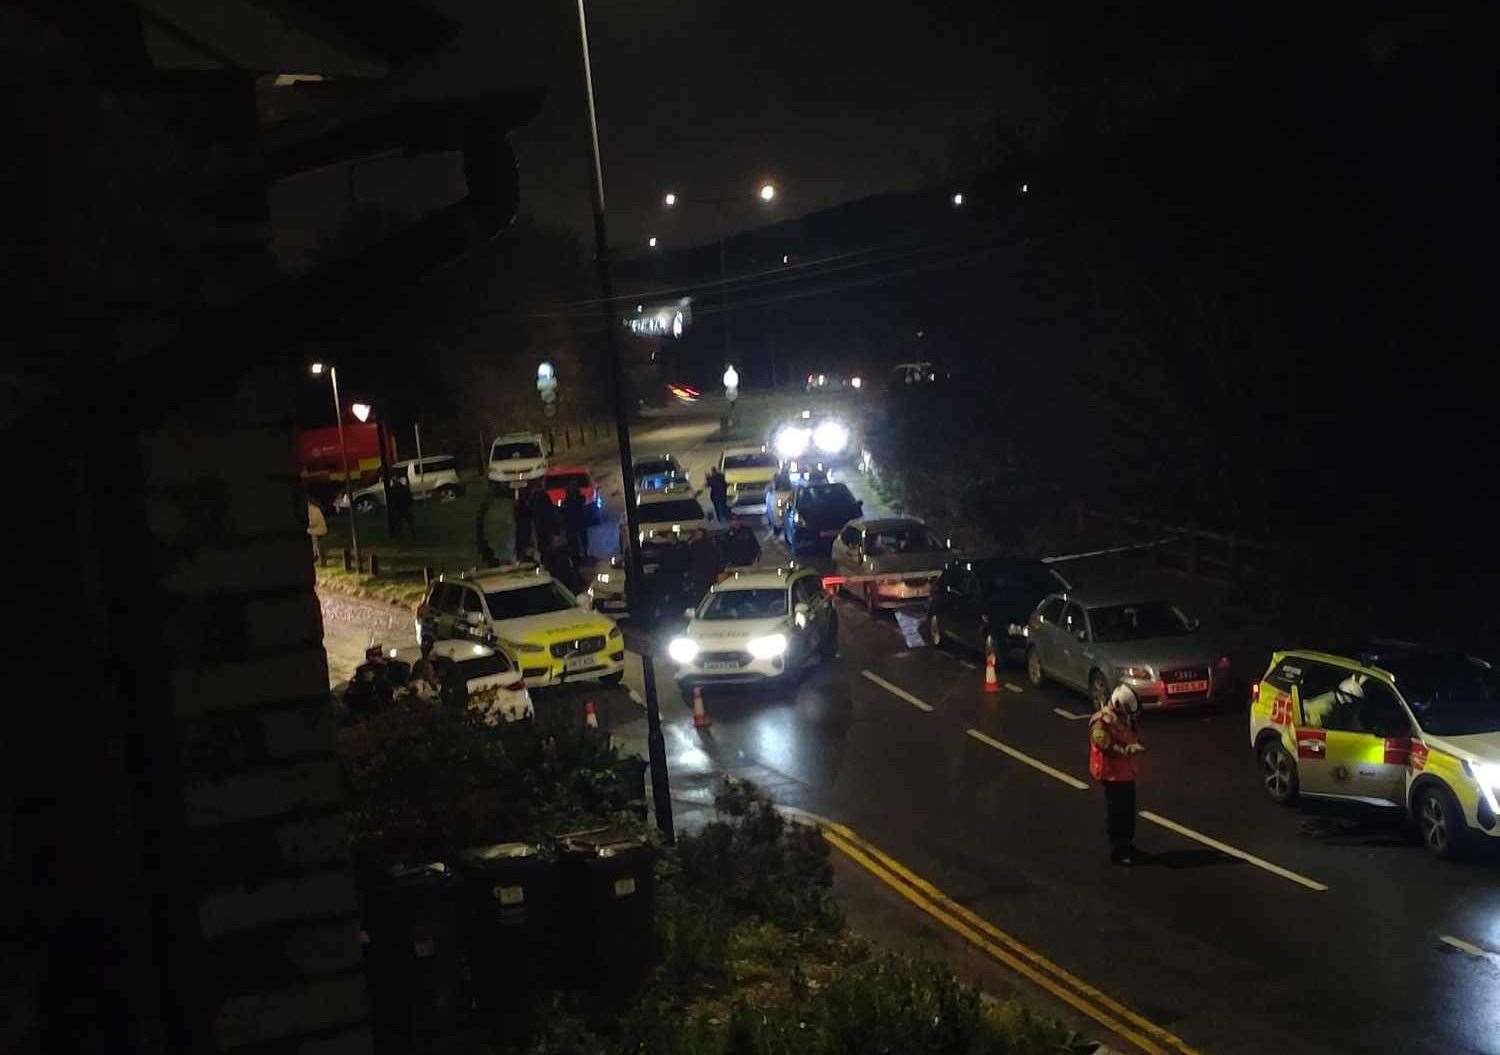 Armed police closed parts of Holborough Road in Snodland. Picture: Bam Savage